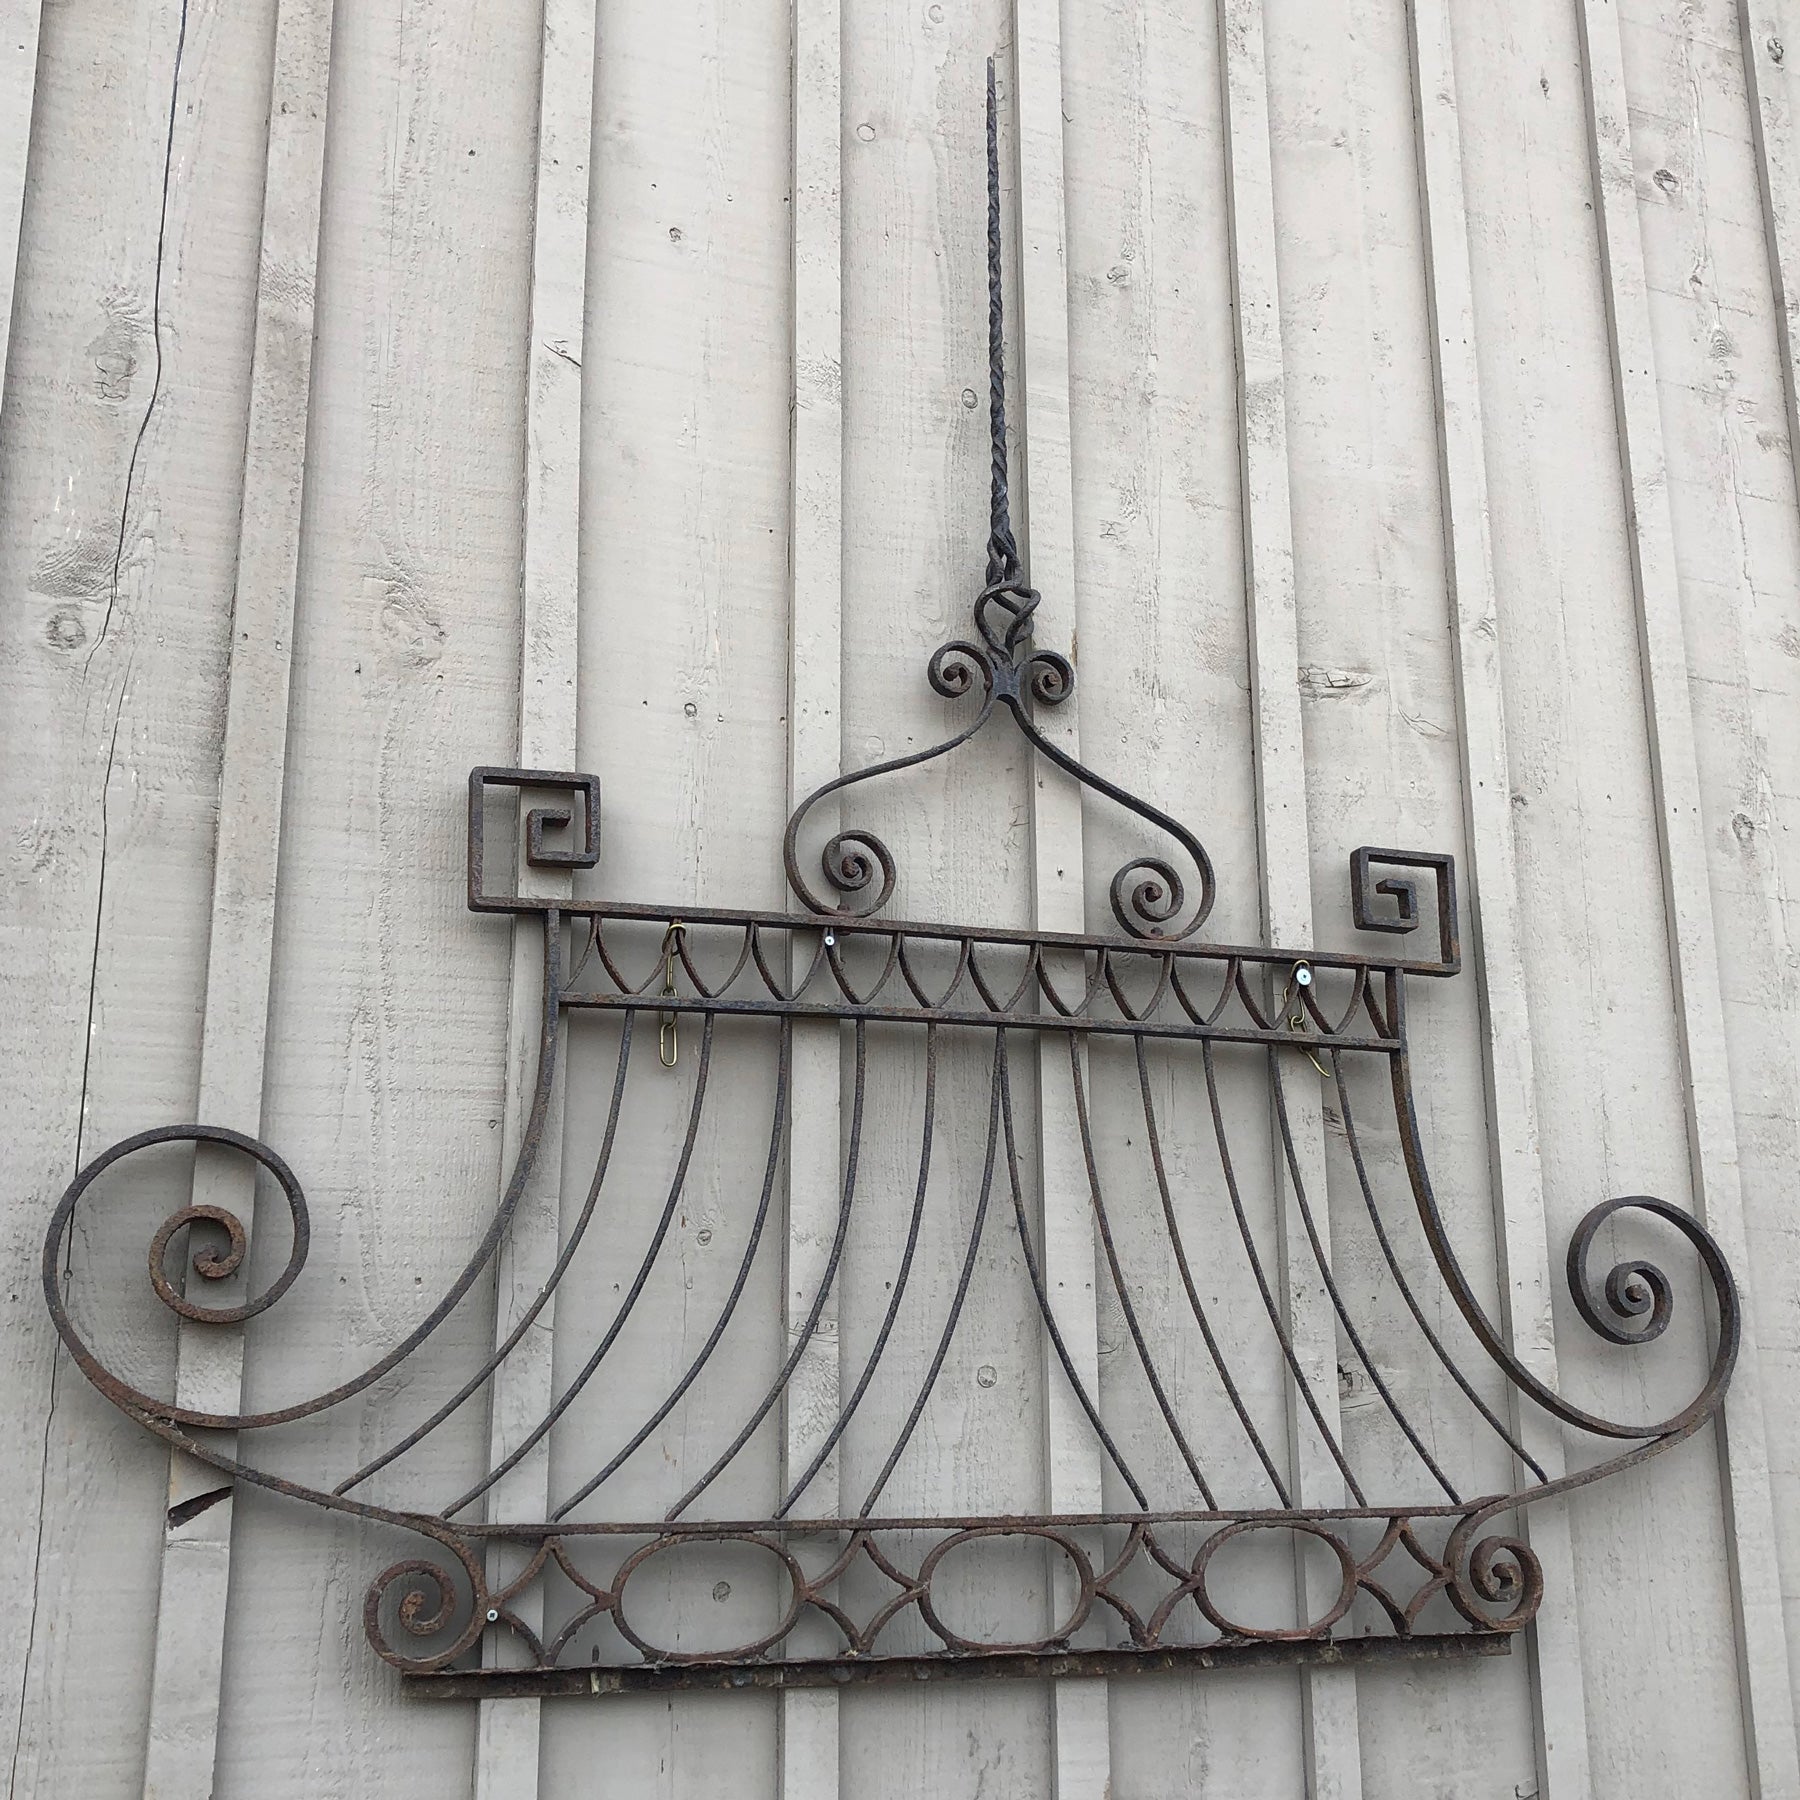 Hand-Forged Iron Entry Gate (top) from the Chateau of Licorne, 18th century